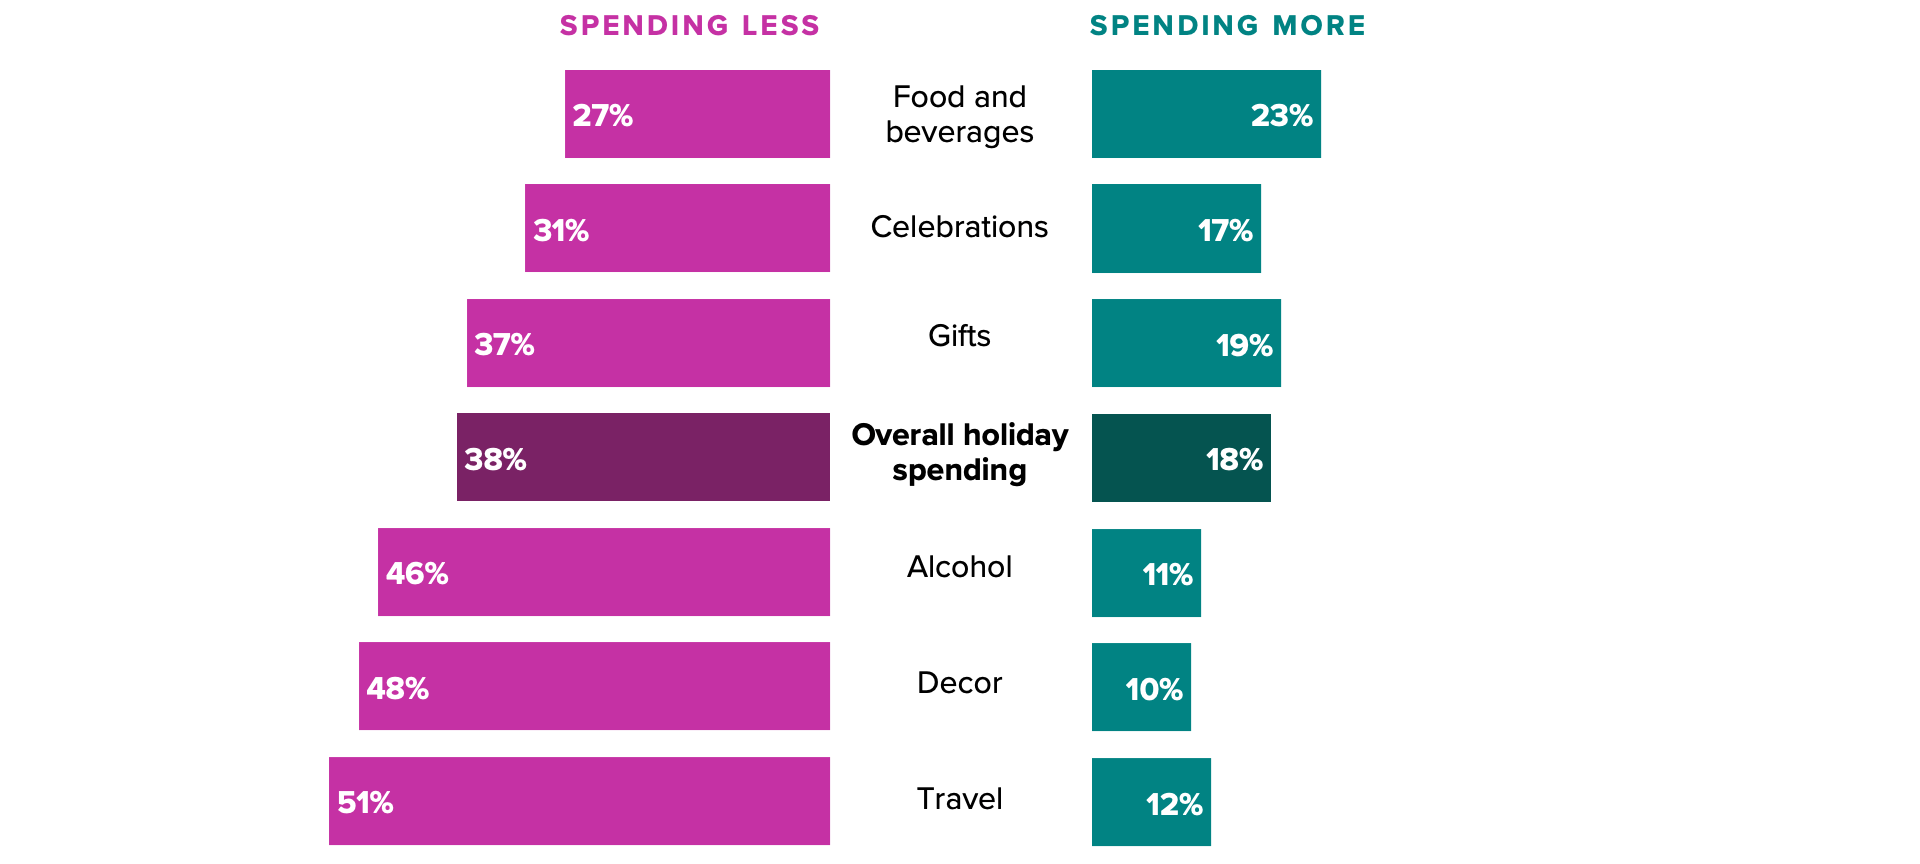 Butterfly chart of what share of respondents are expecting to spend more or less in various holiday categories. The chart shows the highest share of consumers anticipate spending more on food and beverages this season.